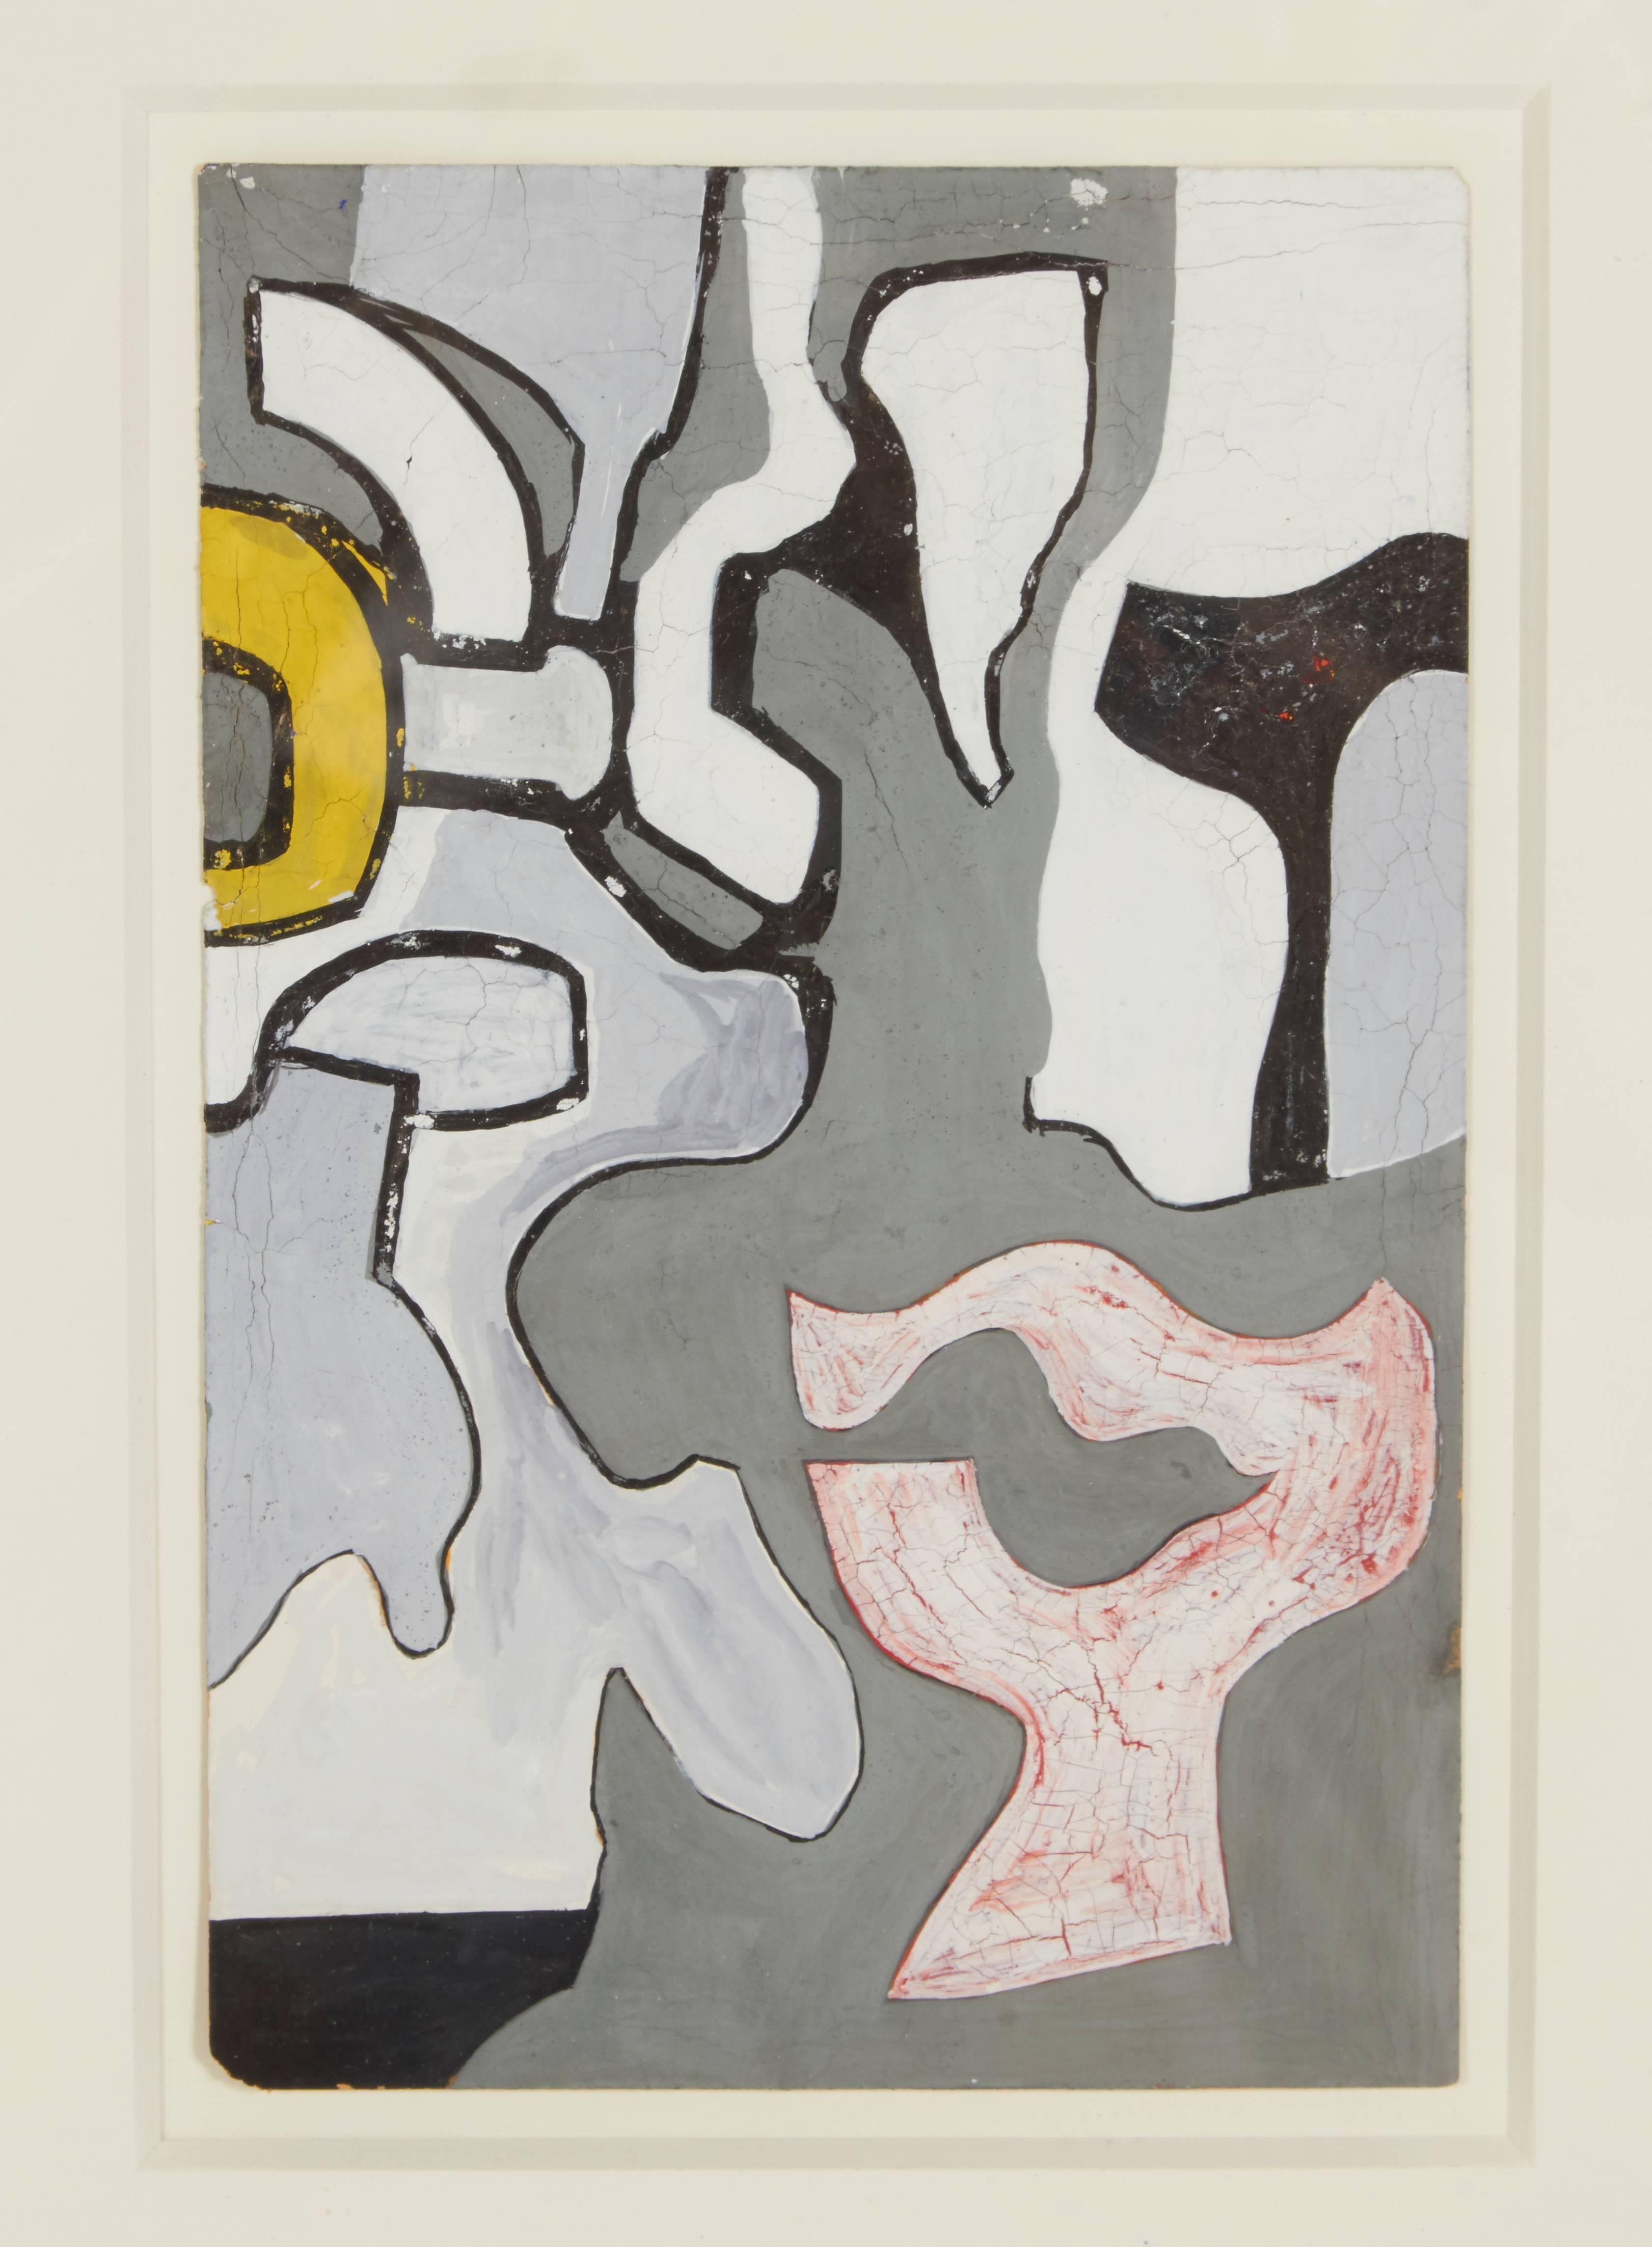 During her first years in New York Blaine's work, which had previously been tightly realist, turned abstract, inspired by Mondrian, Leger and Jean Helion. At one time she was the youngest member of the American Abstract Artists. She was also a